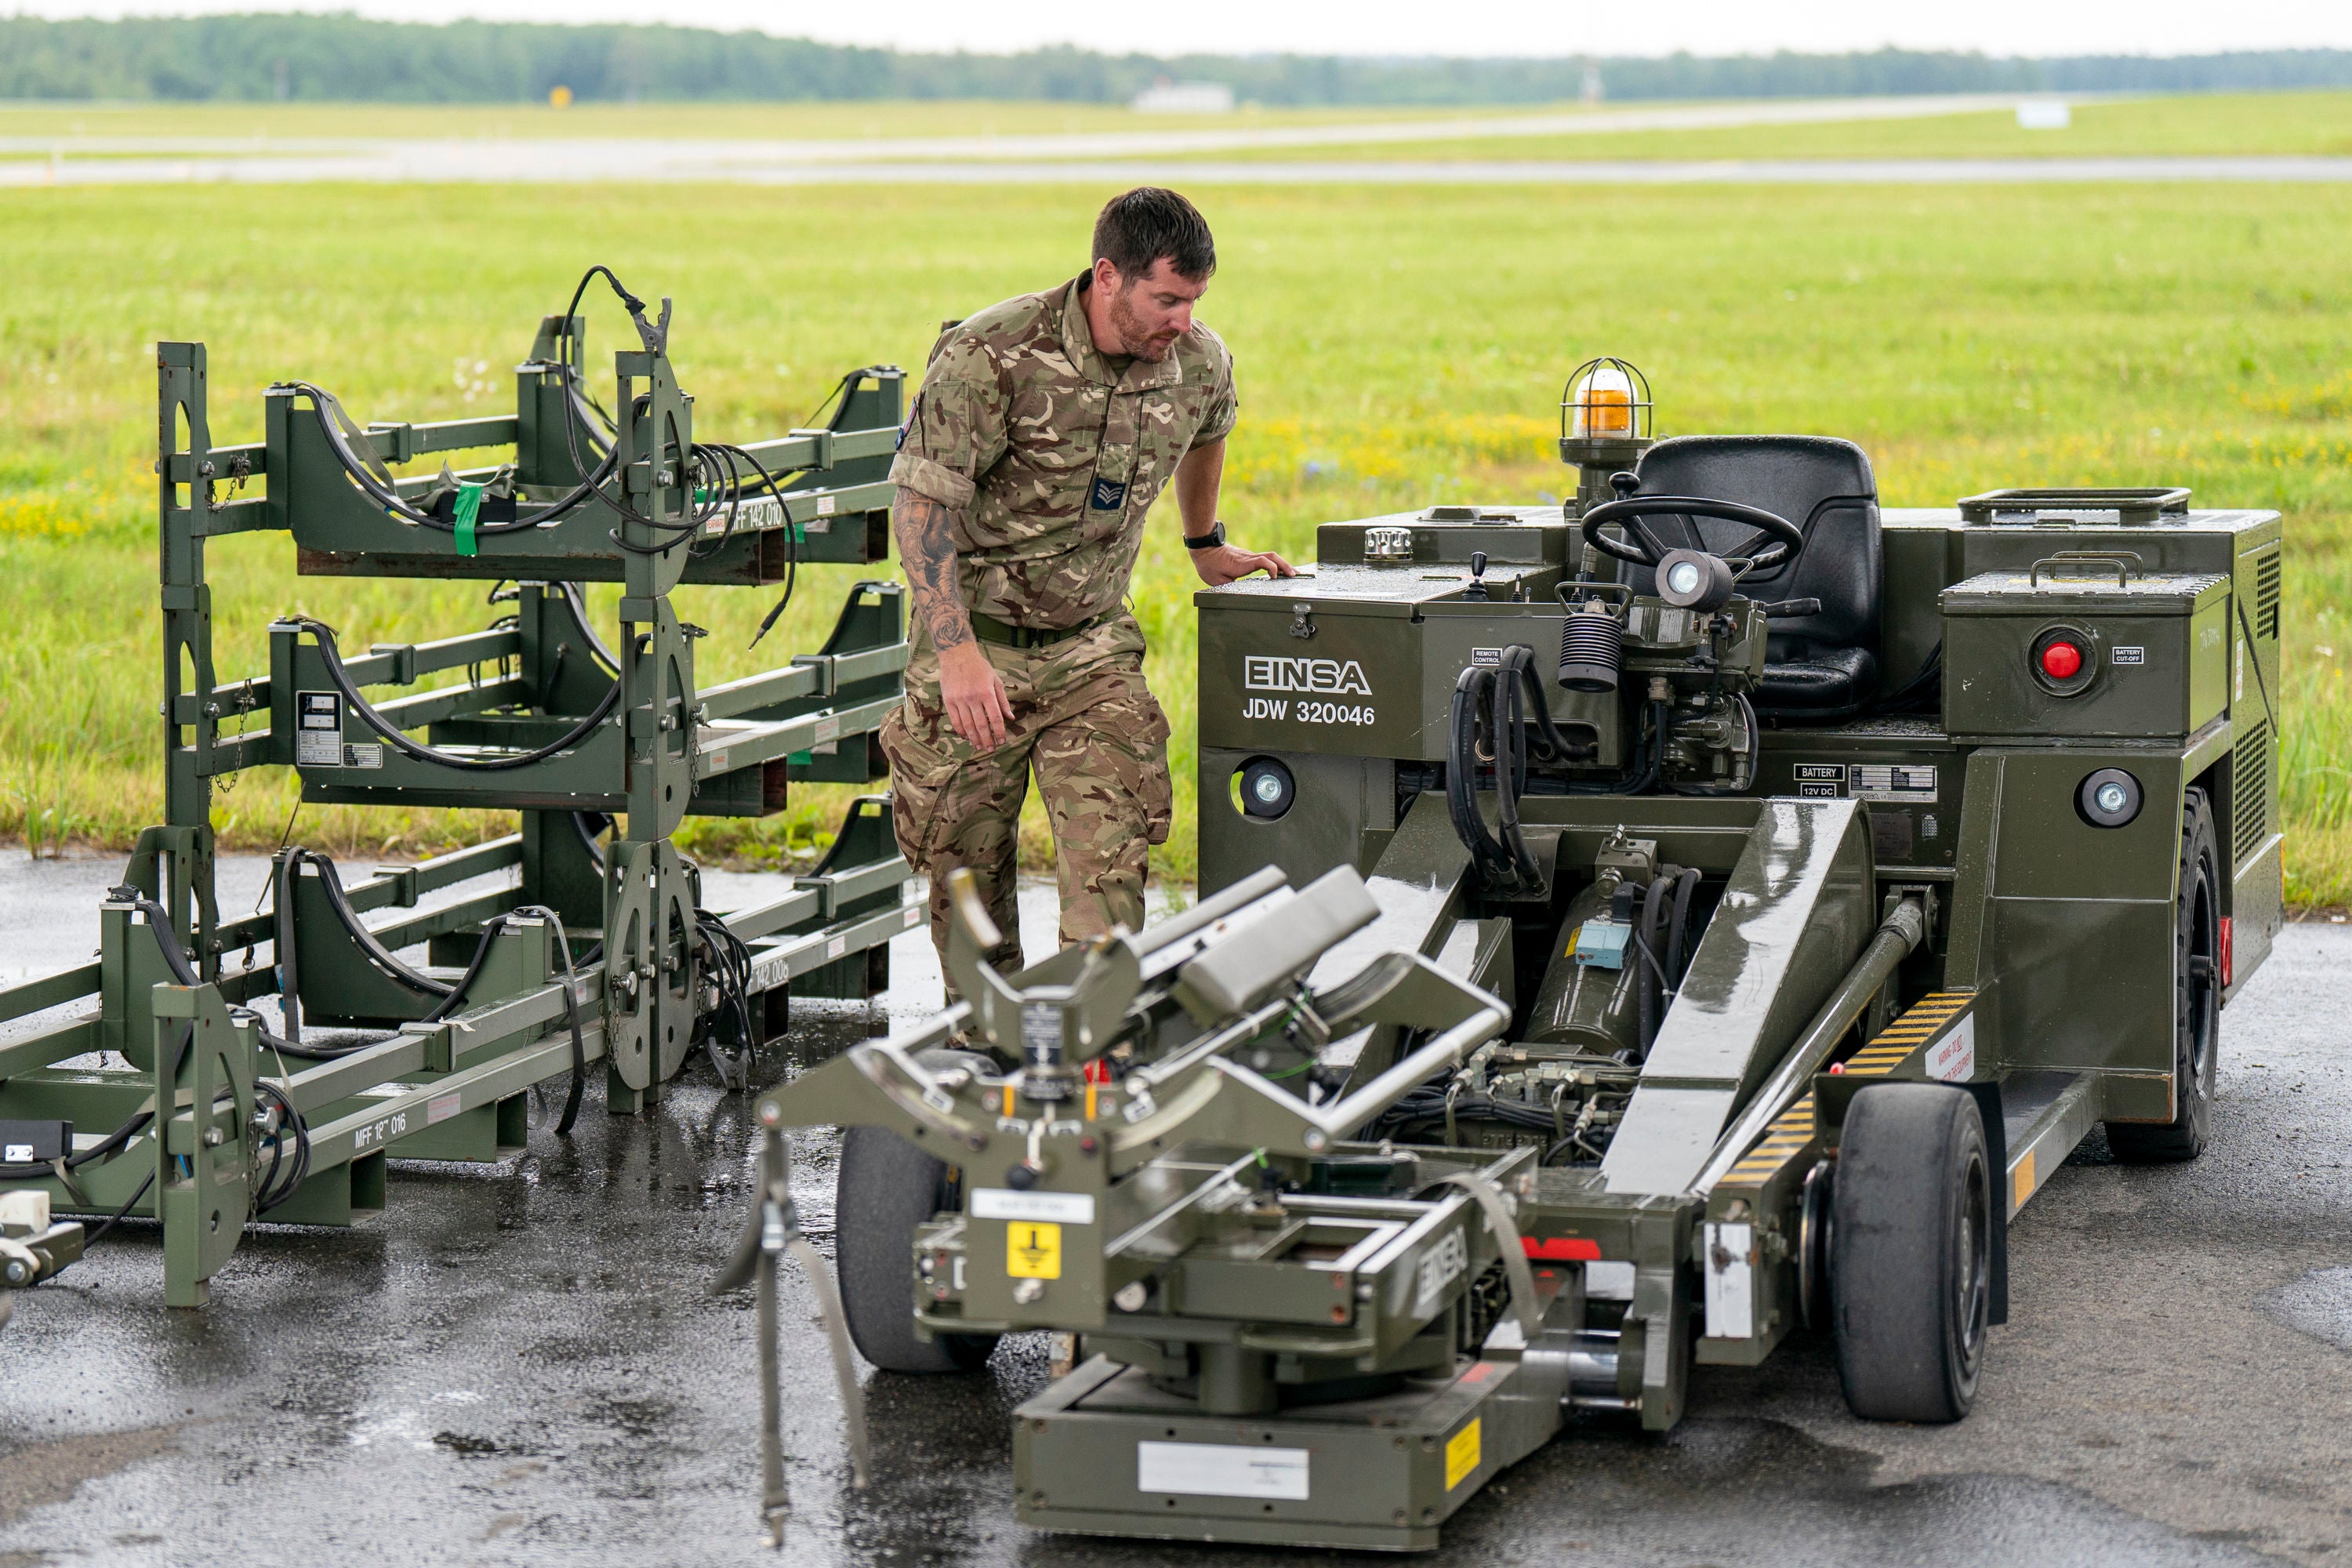 Ground engineer Sergeant Matt Cozens, who is part of the Royal Air Force (RAF)140 Expeditionary Air Wing, inspects the VAP60 weapon loaders, used to arm a squadron of RAF Eurofighter Typhoon jets, currently deployed for Operation Azotize